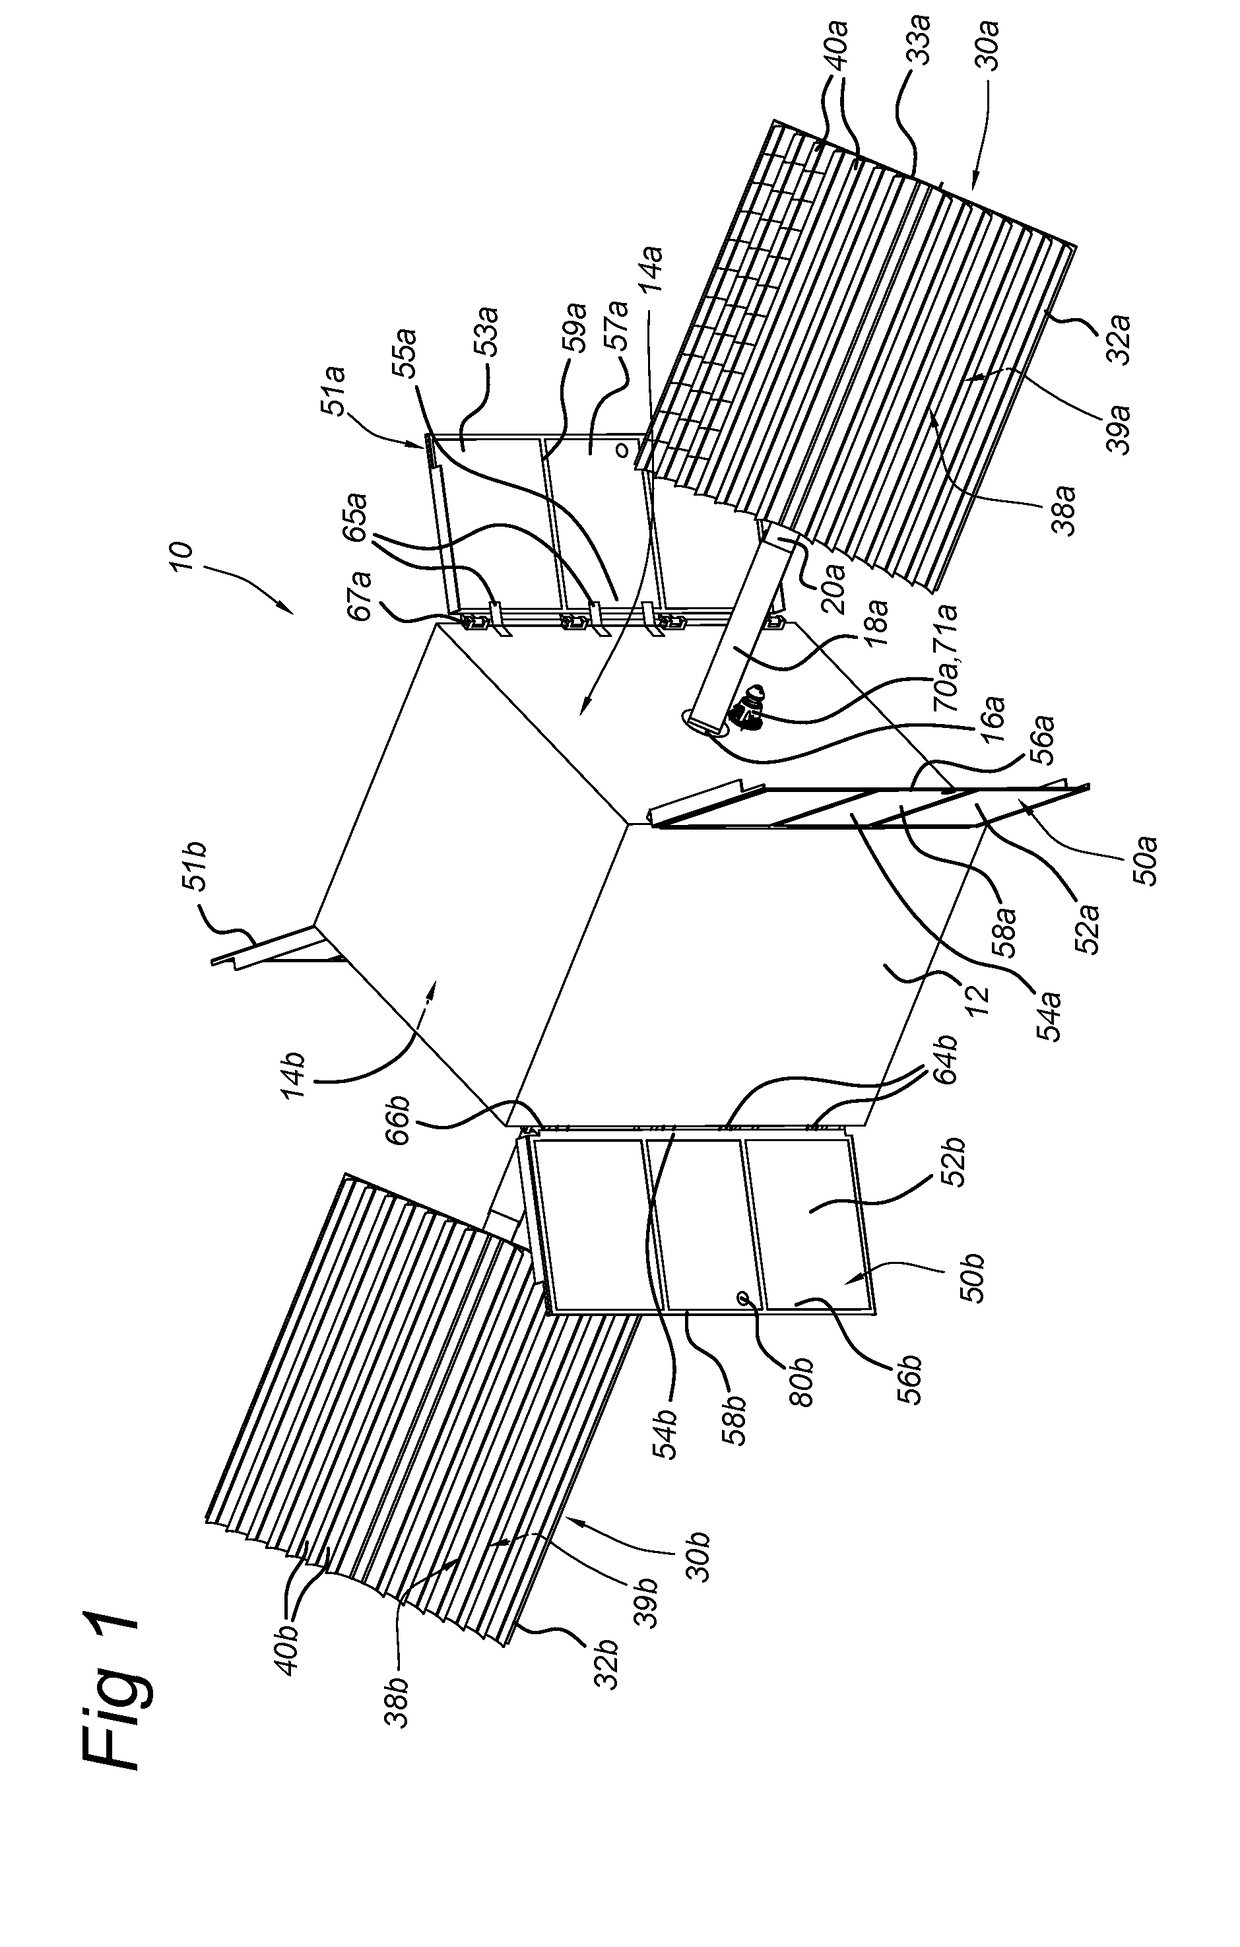 Solar Panel and Flexible Radiator for a Spacecraft